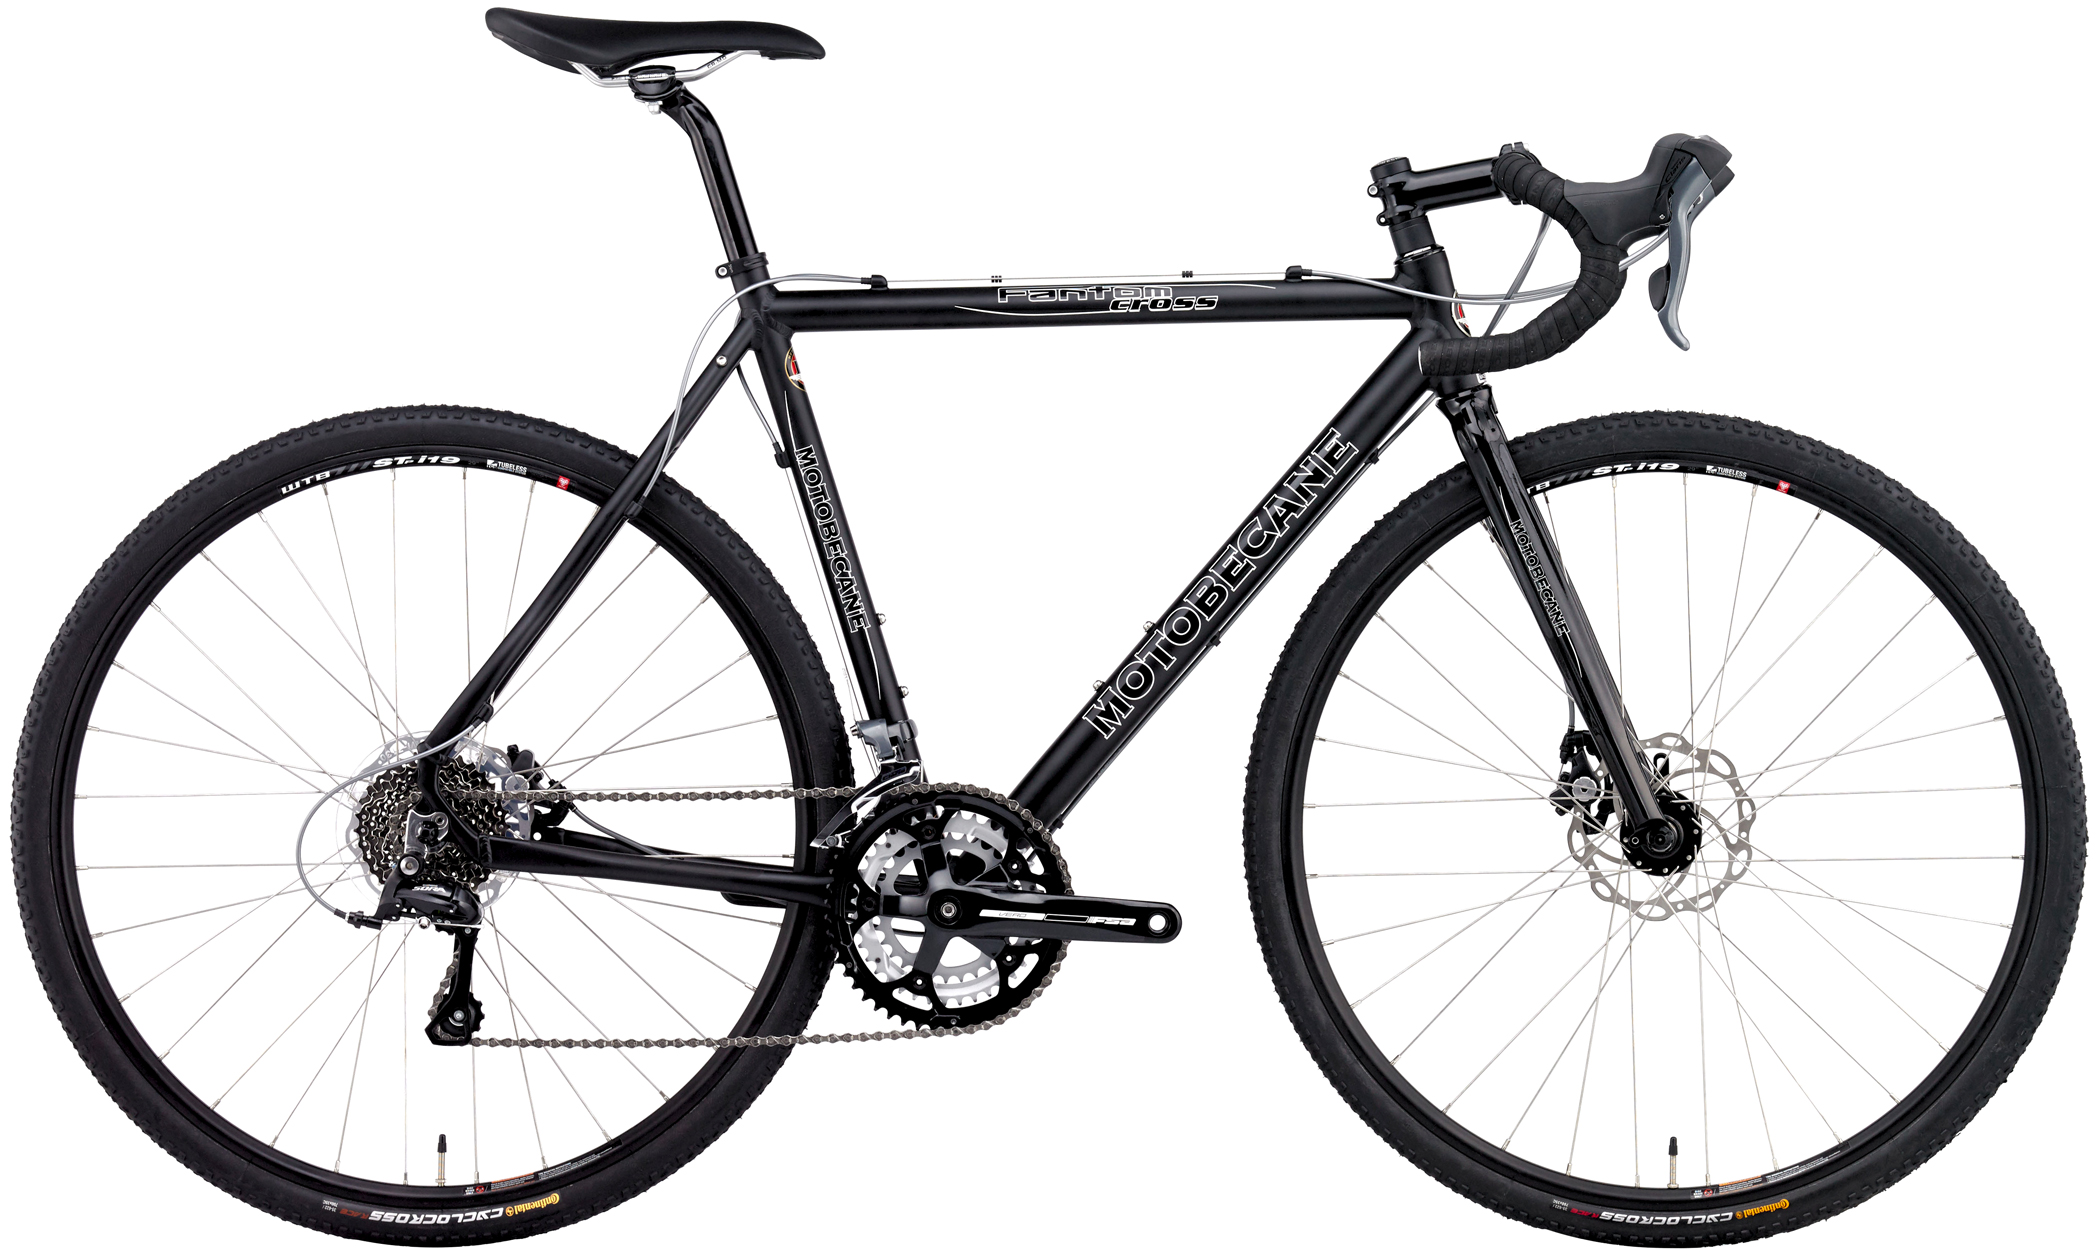 Save up to 60% off Shimano equipped Cyclocross Cross Bikes